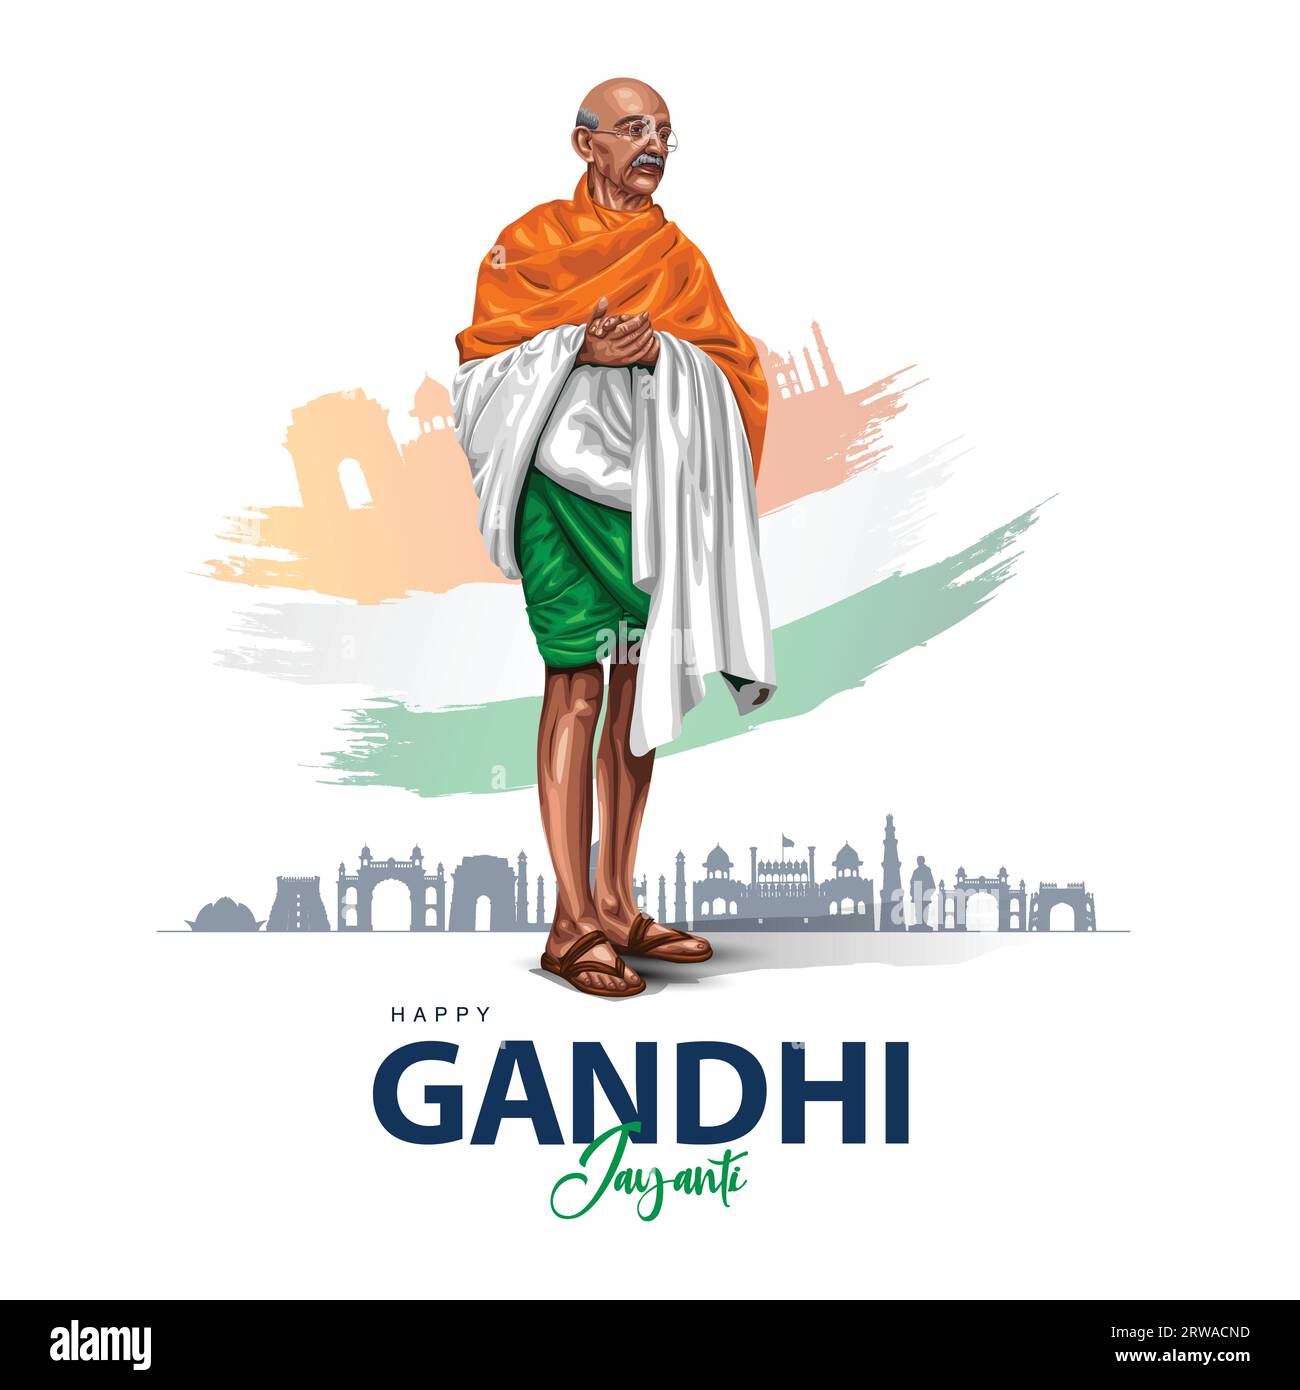 2nd October Happy gandhi jayanti. indian Freedom Fighter Mahatma Gandhi he is known as Bapu. abstract vector illustration design Stock Vector